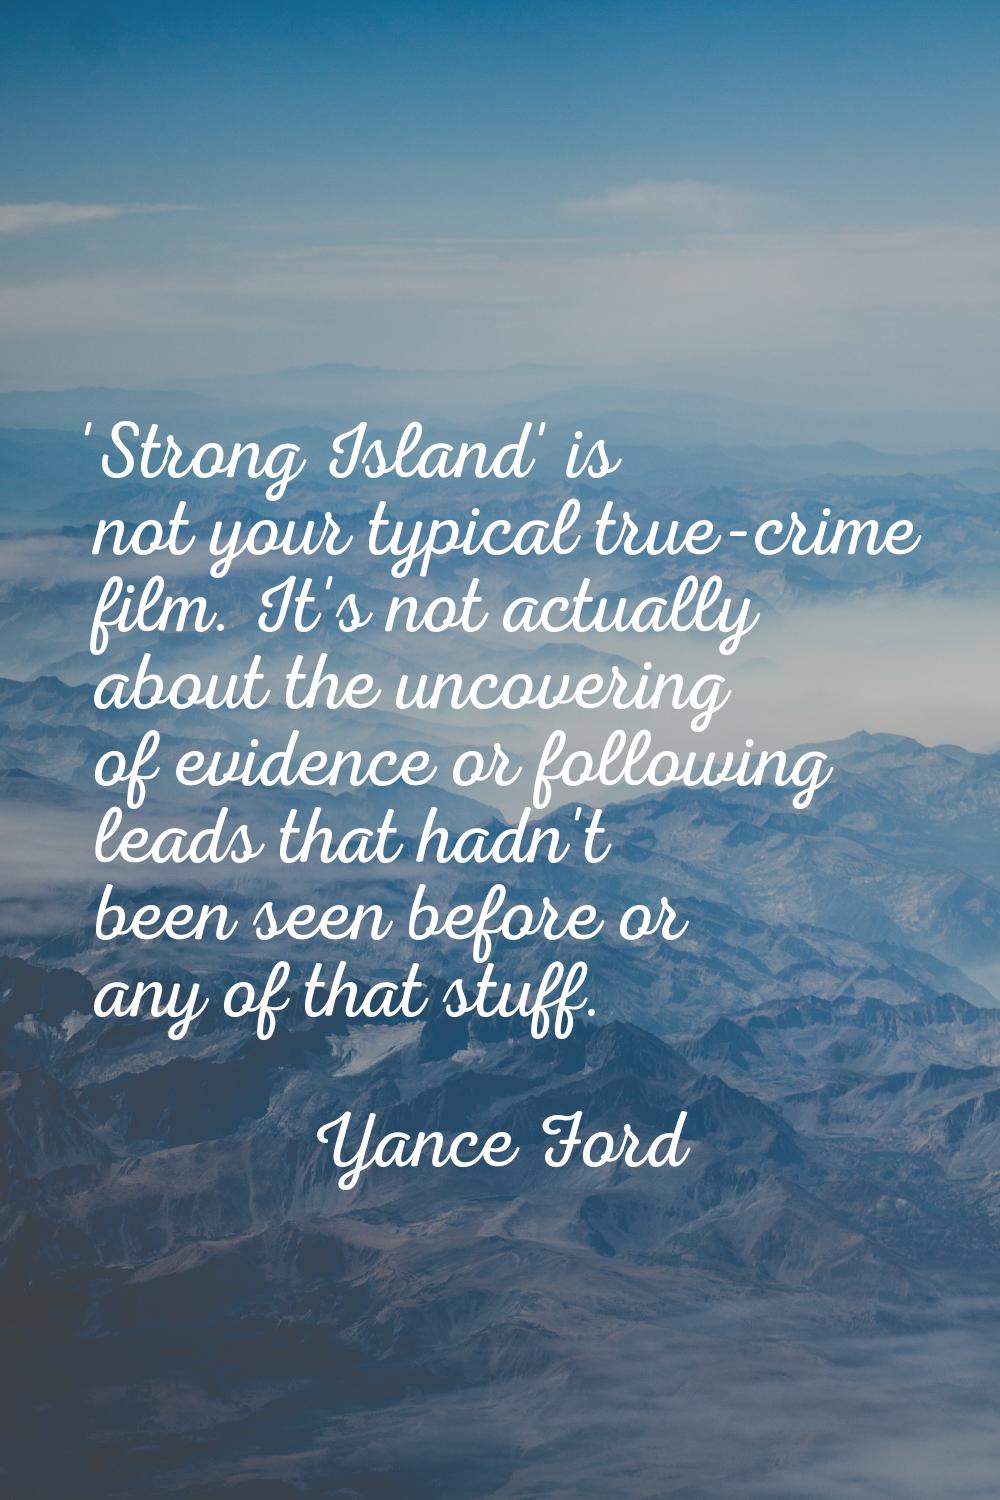 'Strong Island' is not your typical true-crime film. It's not actually about the uncovering of evid